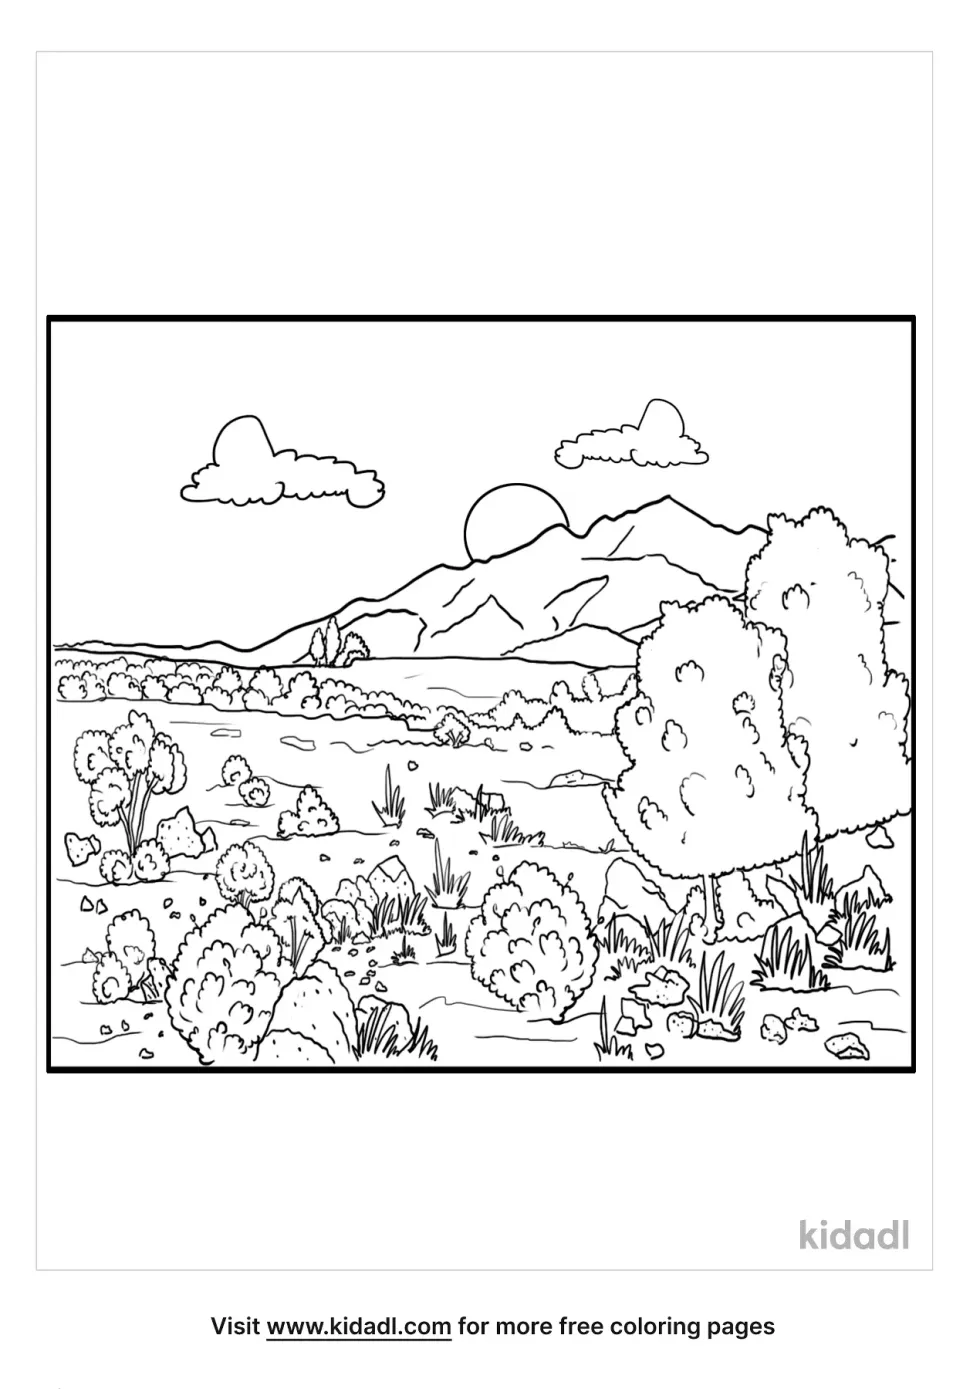 Wilderness Coloring Page